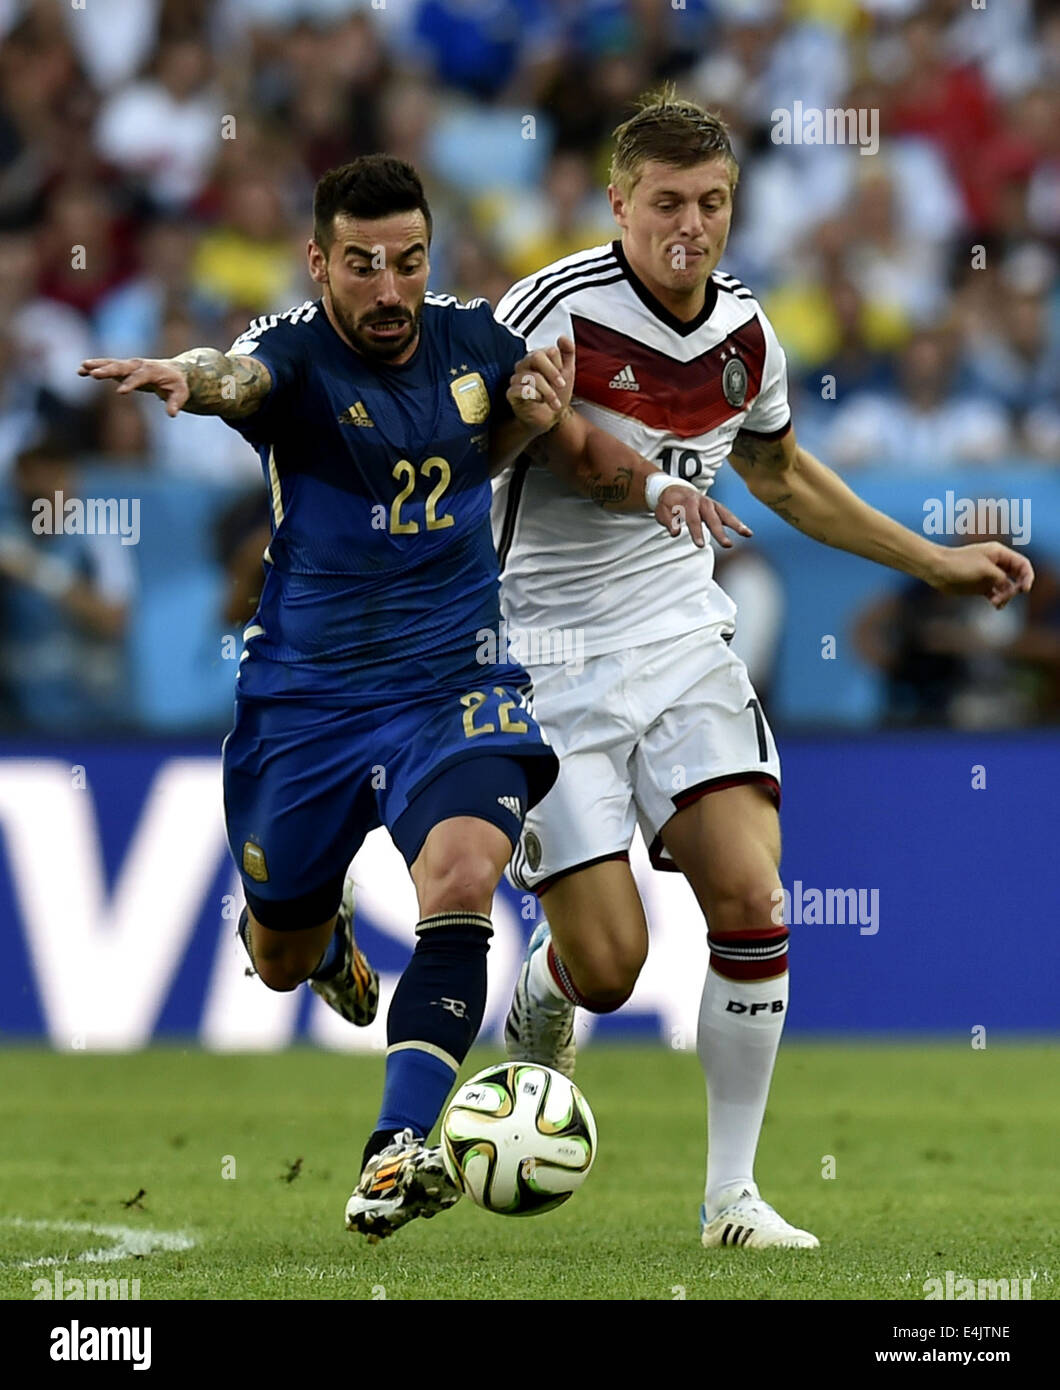 Rio De Janeiro, Brazil. 13th July, 2014. Germany's Toni Kroos (R) vies with Argentina's Ezequiel Lavezzi during the final match between Germany and Argentina of 2014 FIFA World Cup at the Estadio do Maracana Stadium in Rio de Janeiro, Brazil, on July 13, 2014. Credit:  Qi Heng/Xinhua/Alamy Live News Stock Photo